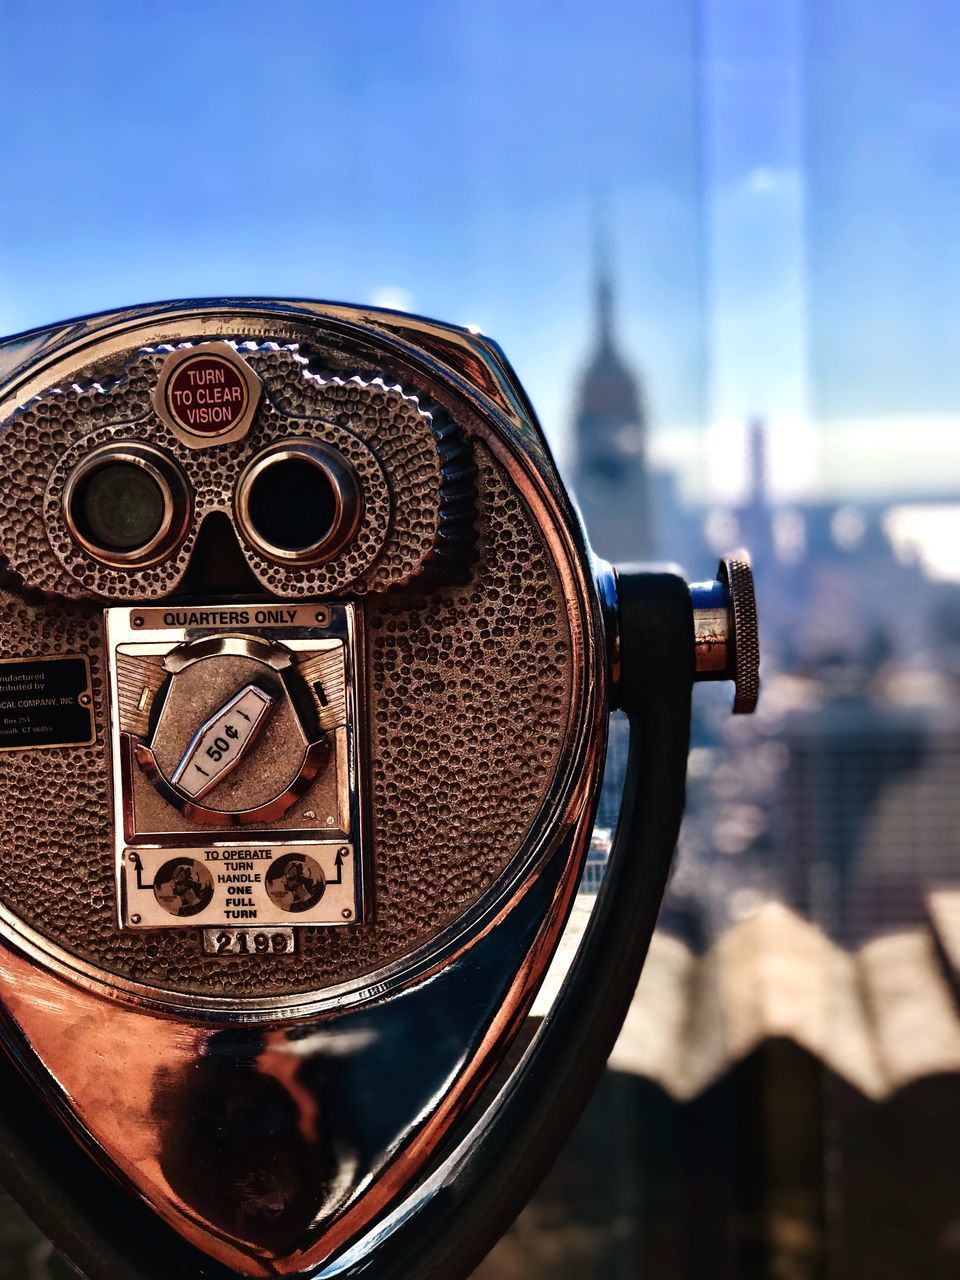 binoculars, coin operated, focus on foreground, close-up, coin-operated binoculars, sky, architecture, building exterior, day, no people, technology, built structure, metal, city, nature, surveillance, cityscape, security, outdoors, hand-held telescope, silver colored